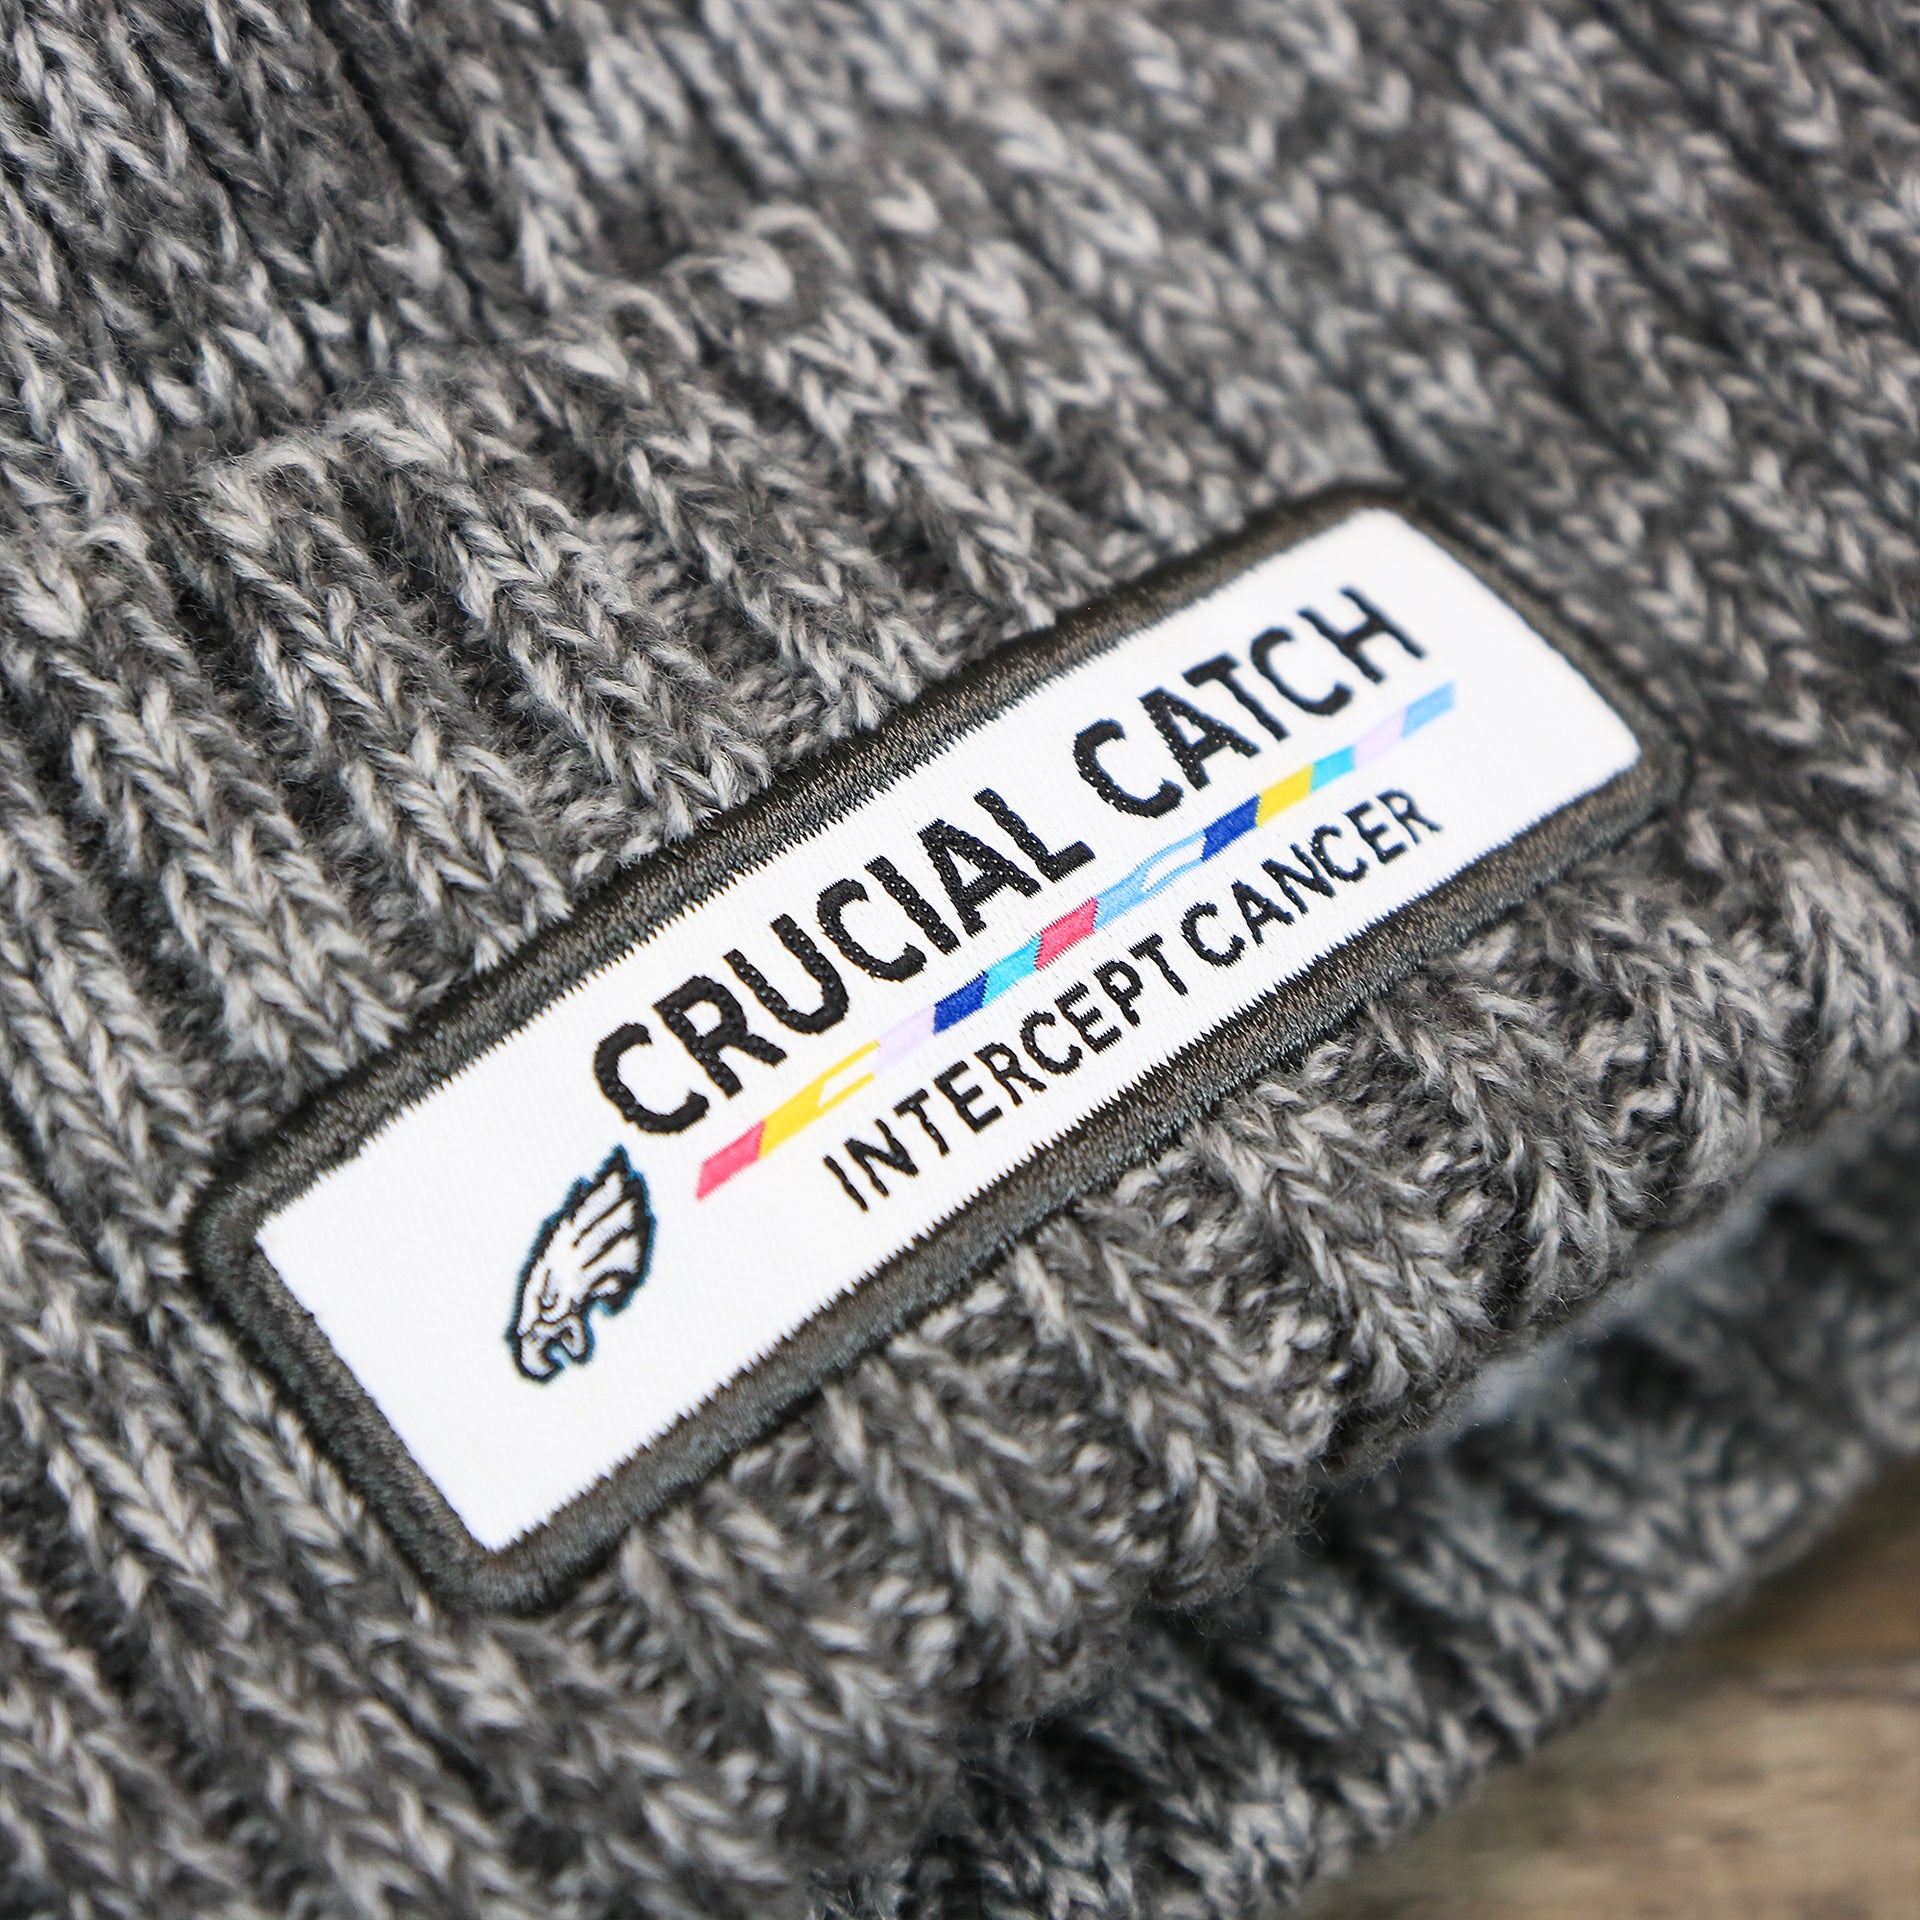 The Crucial Catch Patch on the Philadelphia Eagles On Field Crucial Catch Patch NFL Winter Beanie | Graphite Winter Beanie